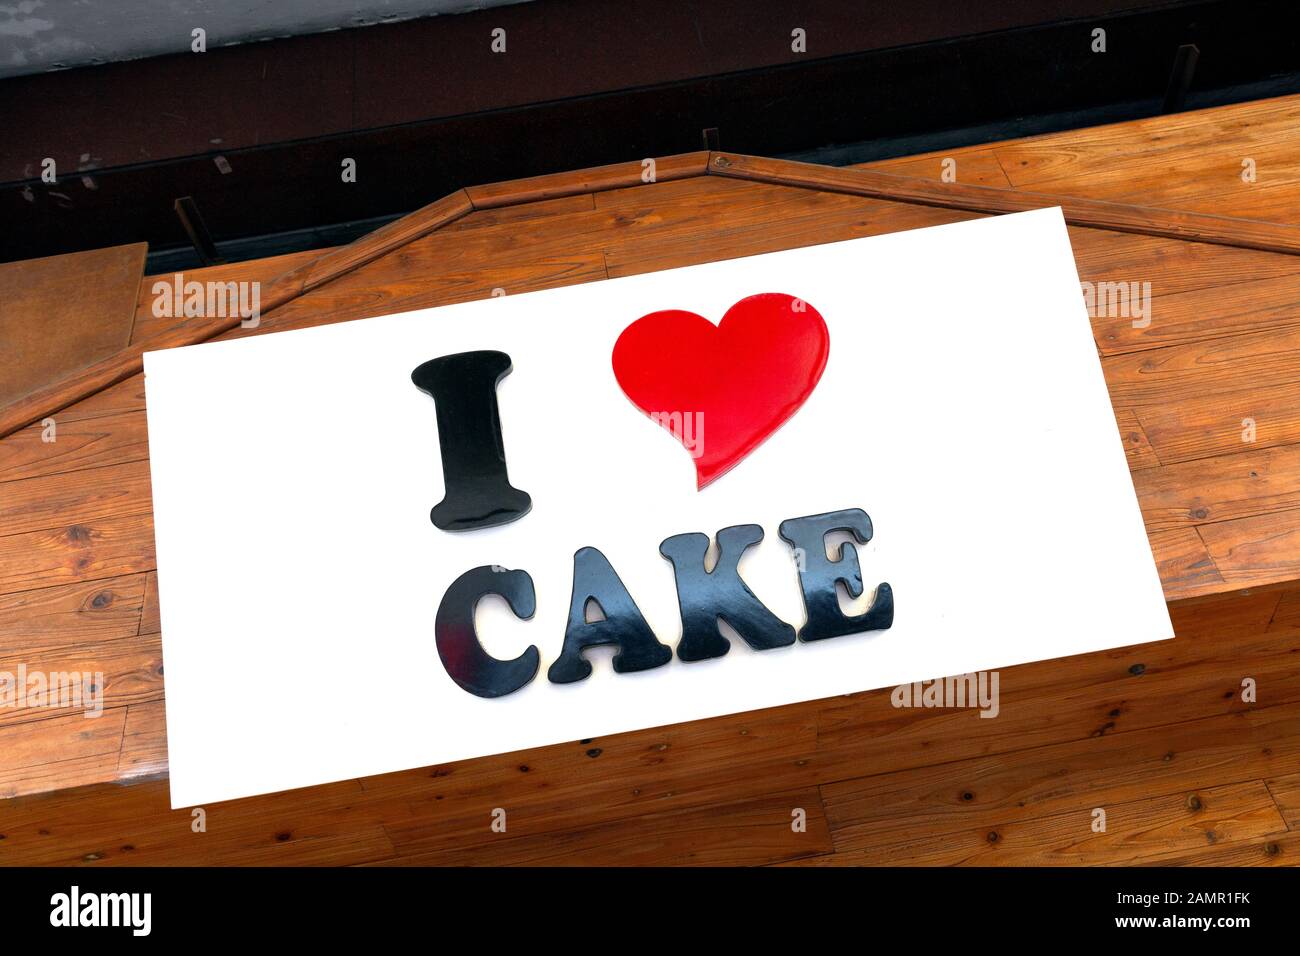 "I Love Cake sign with a Heart", Stockfoto